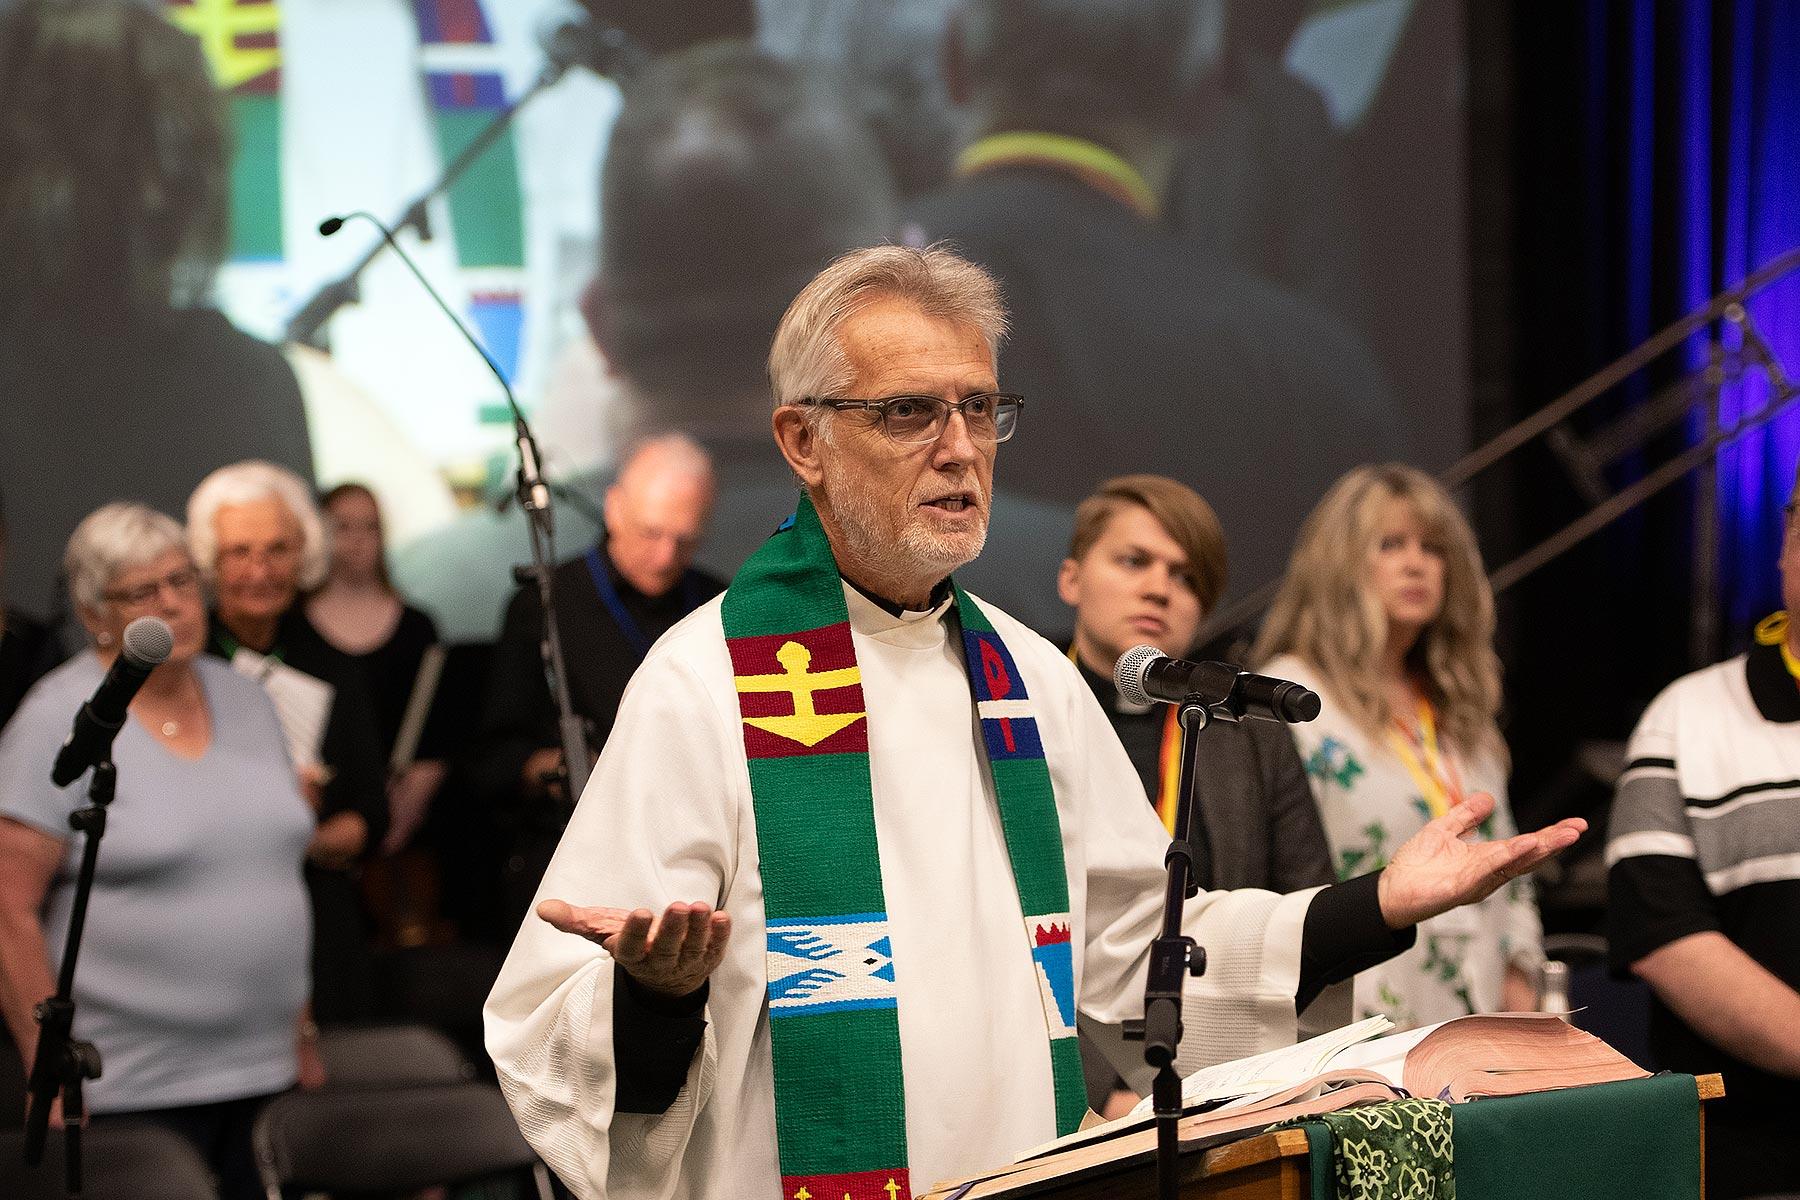 LWF General Secretary Rev. Dr Martin Junge participated in the opening worship of the National Convention of the Evangelical Lutheran Church in Canada and addressed the convention, offering greetings and insights from the LWF. Photo: ELCIC Communications.